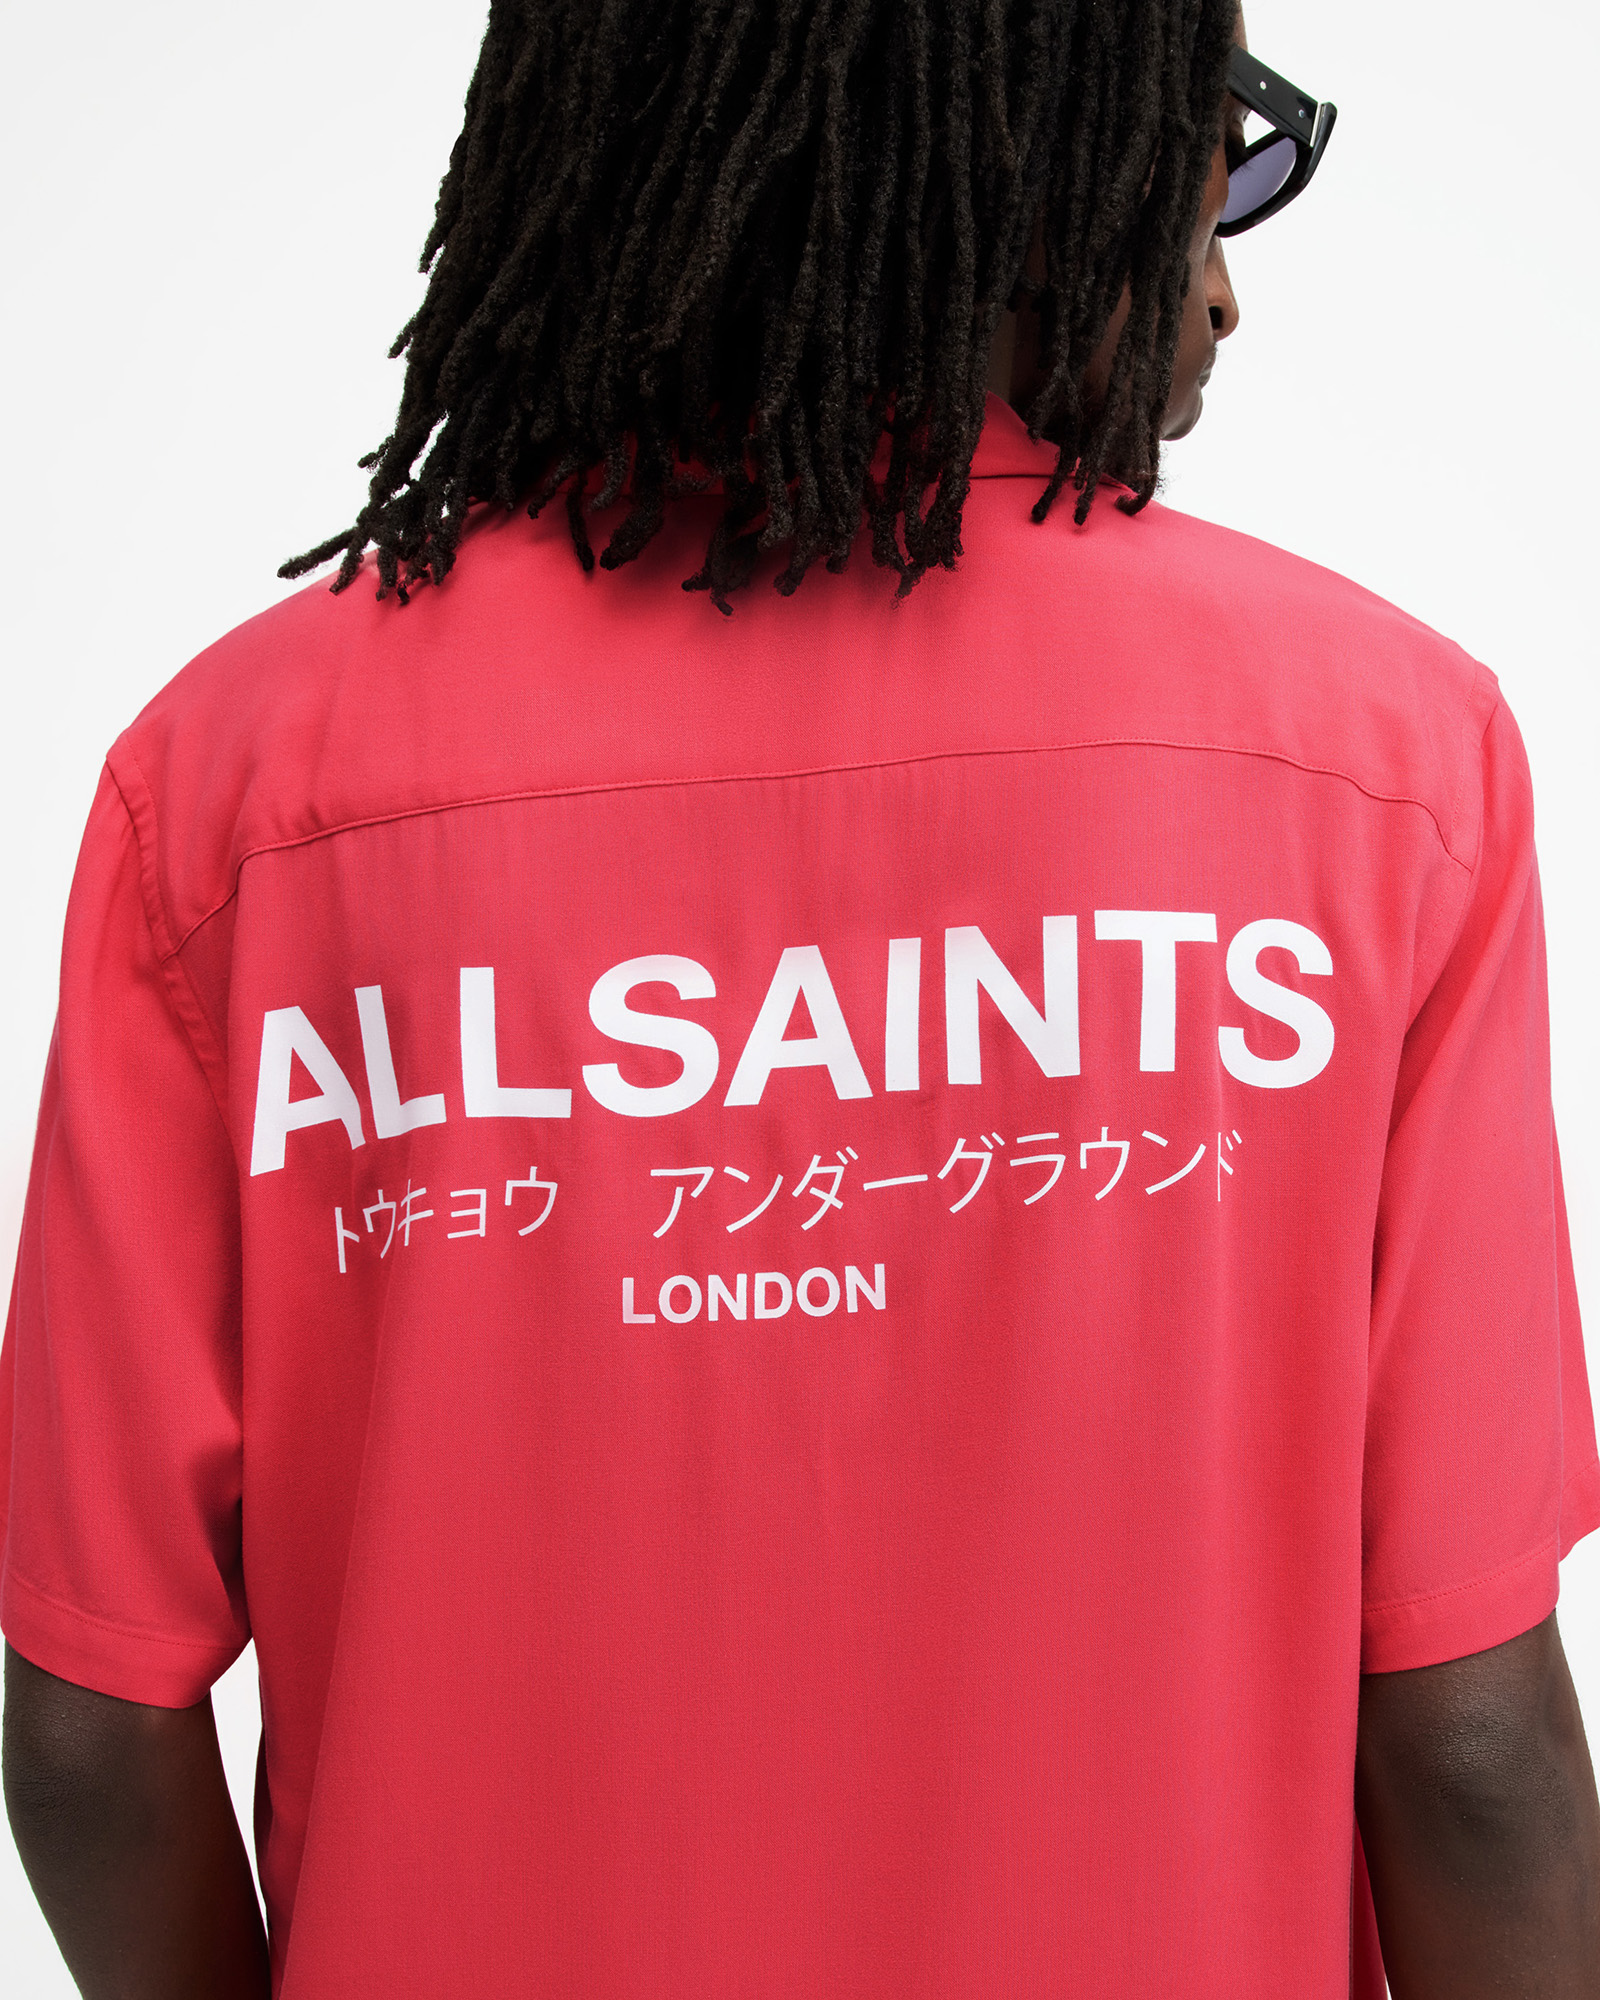 AllSaints Underground Logo Relaxed Fit Shirt,, Hot Pink